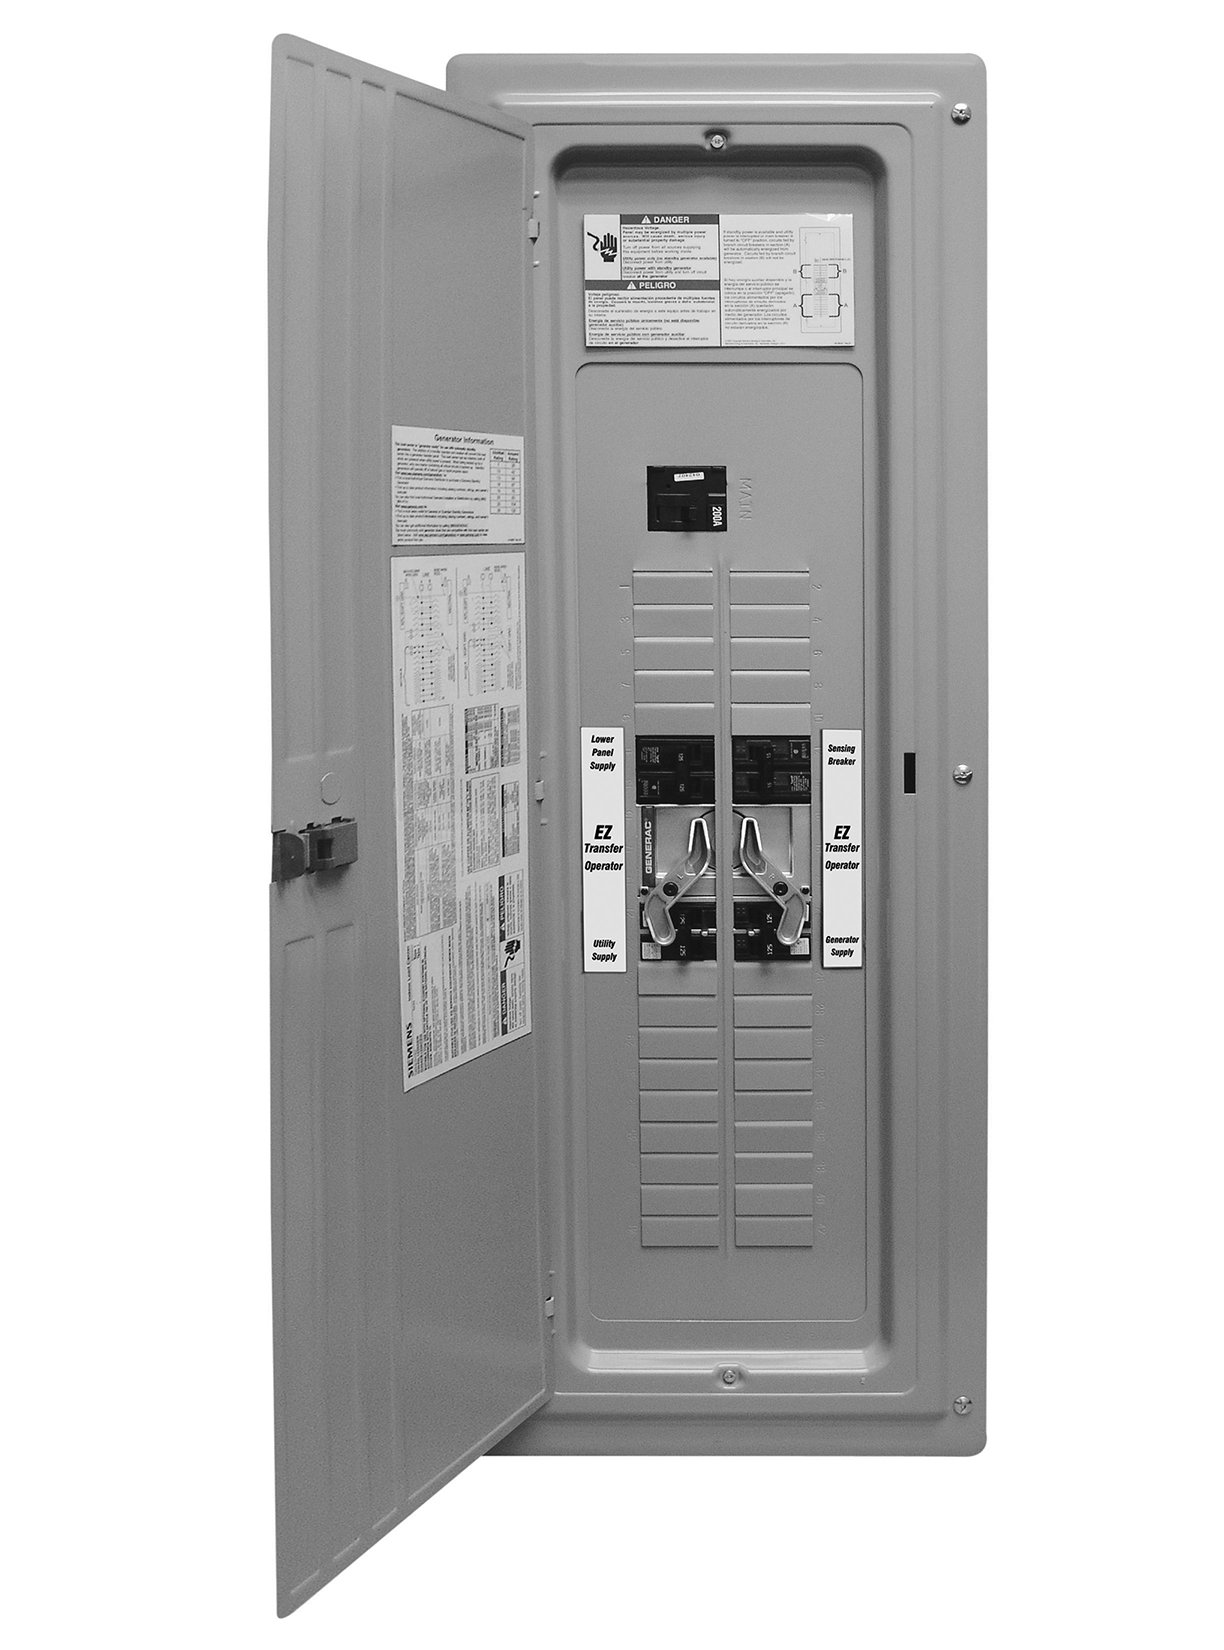 Transfer Switch Automatic 200A Service Entrance Rated Load Center G0054492 Product Image